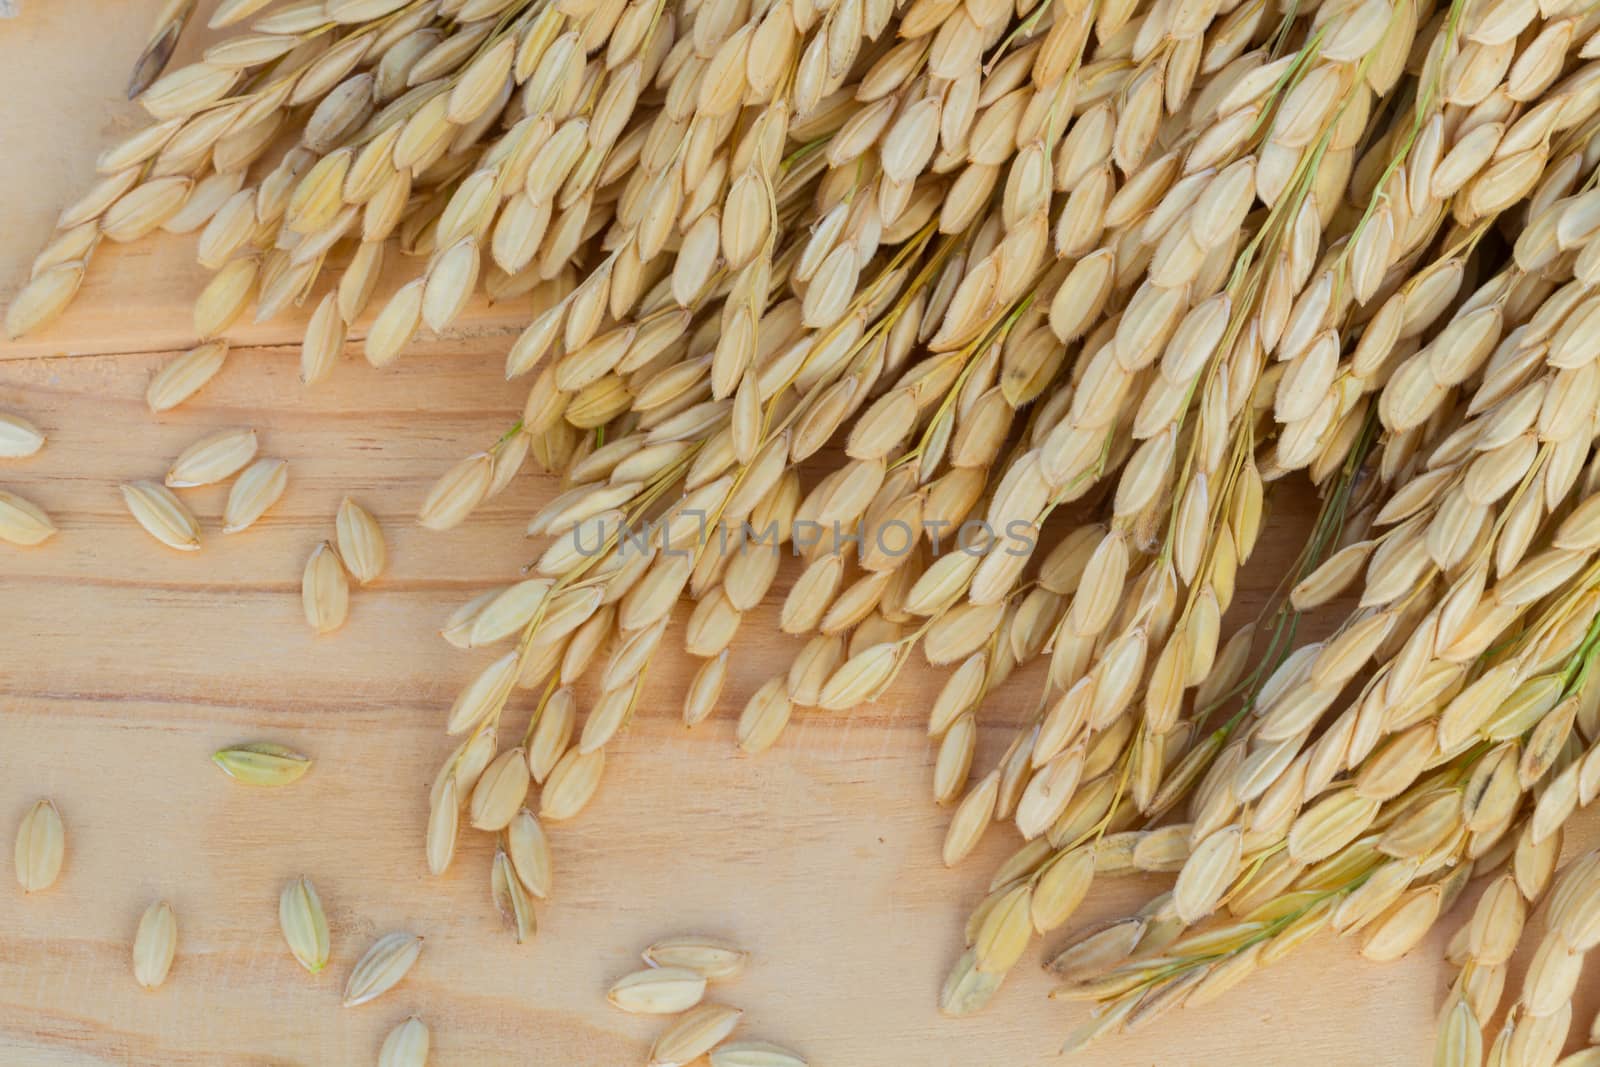 grains, ear of rice on the wooden background